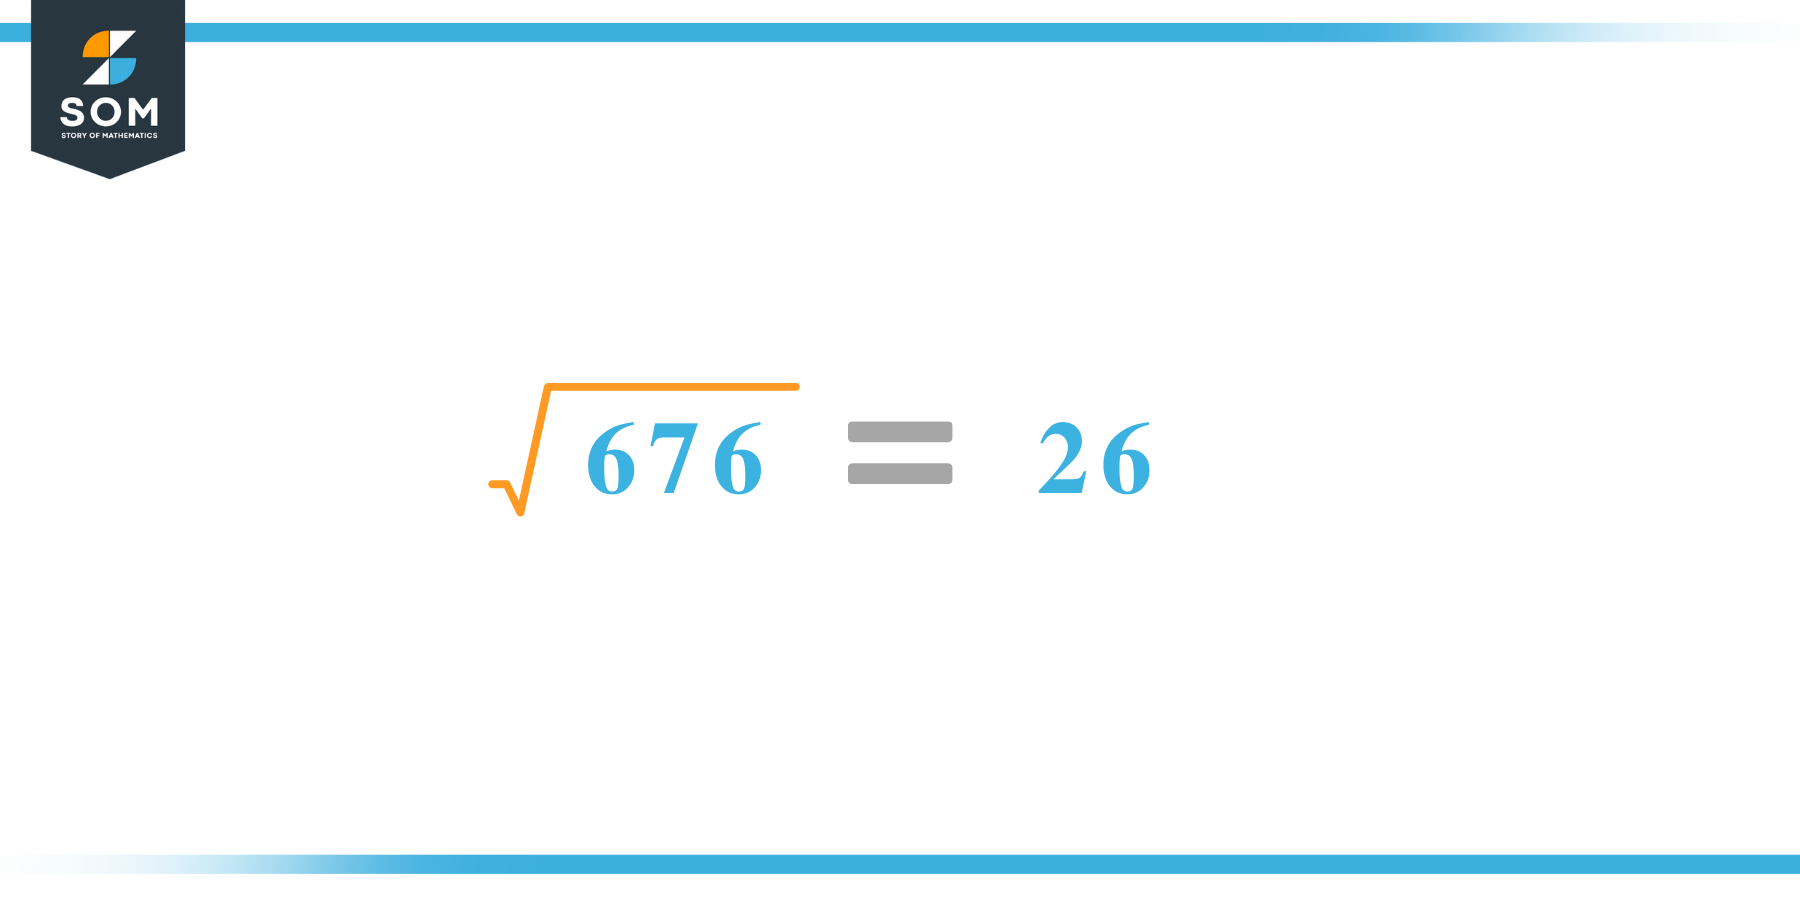 Square root of 676 Calculation